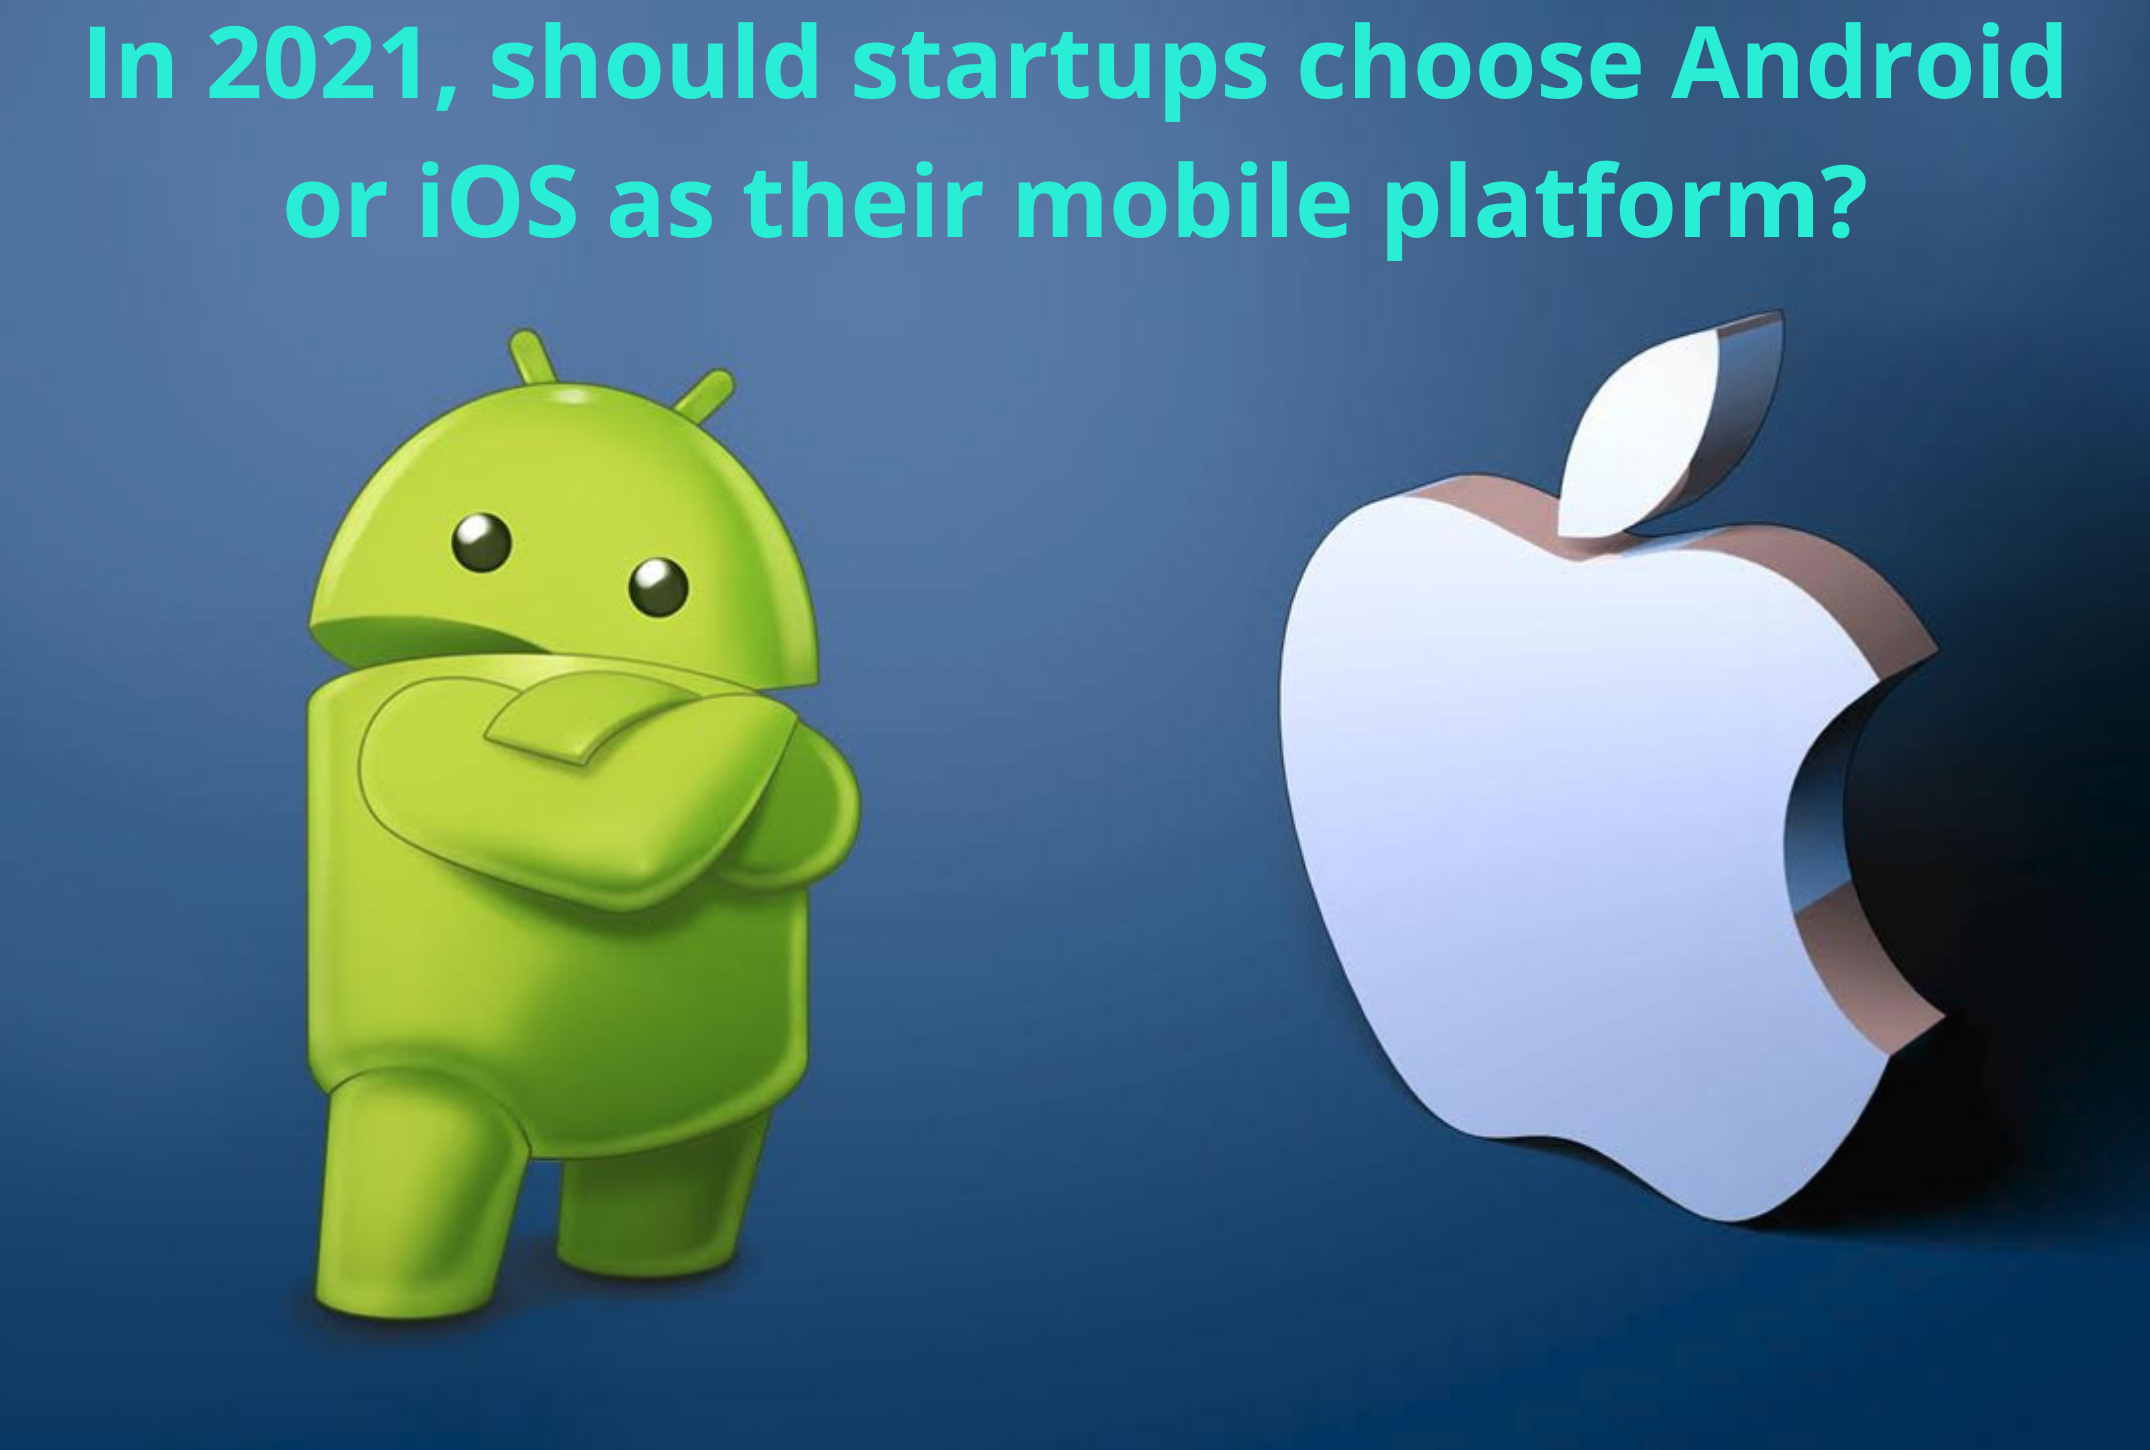 In 2021, should startups choose Android or iOS as their mobile platform